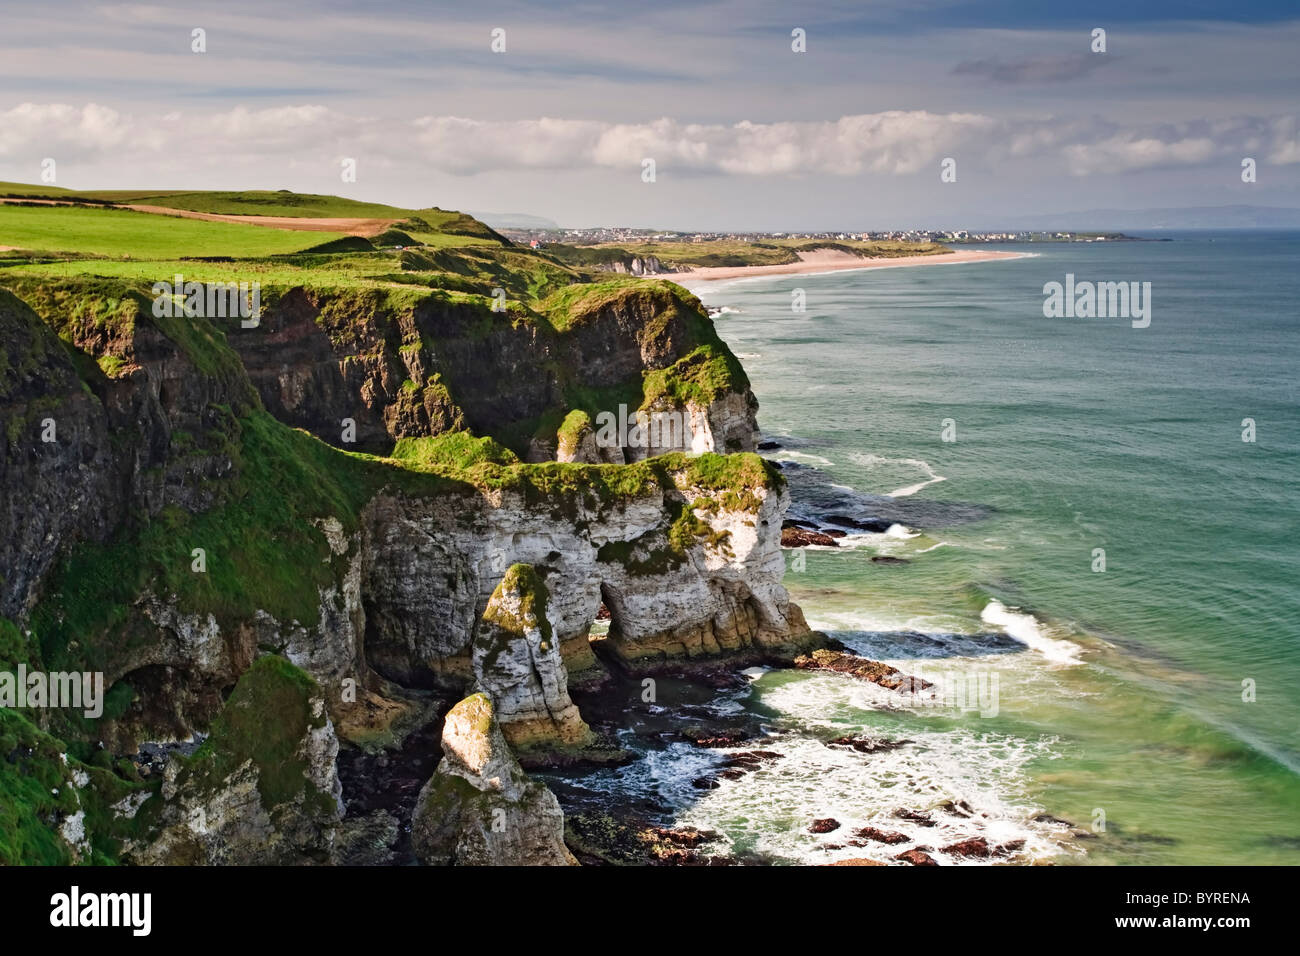 The chalk cliffs of Burnfoot looking toward the town of Portrush, County Antrim, Northern Ireland Stock Photo